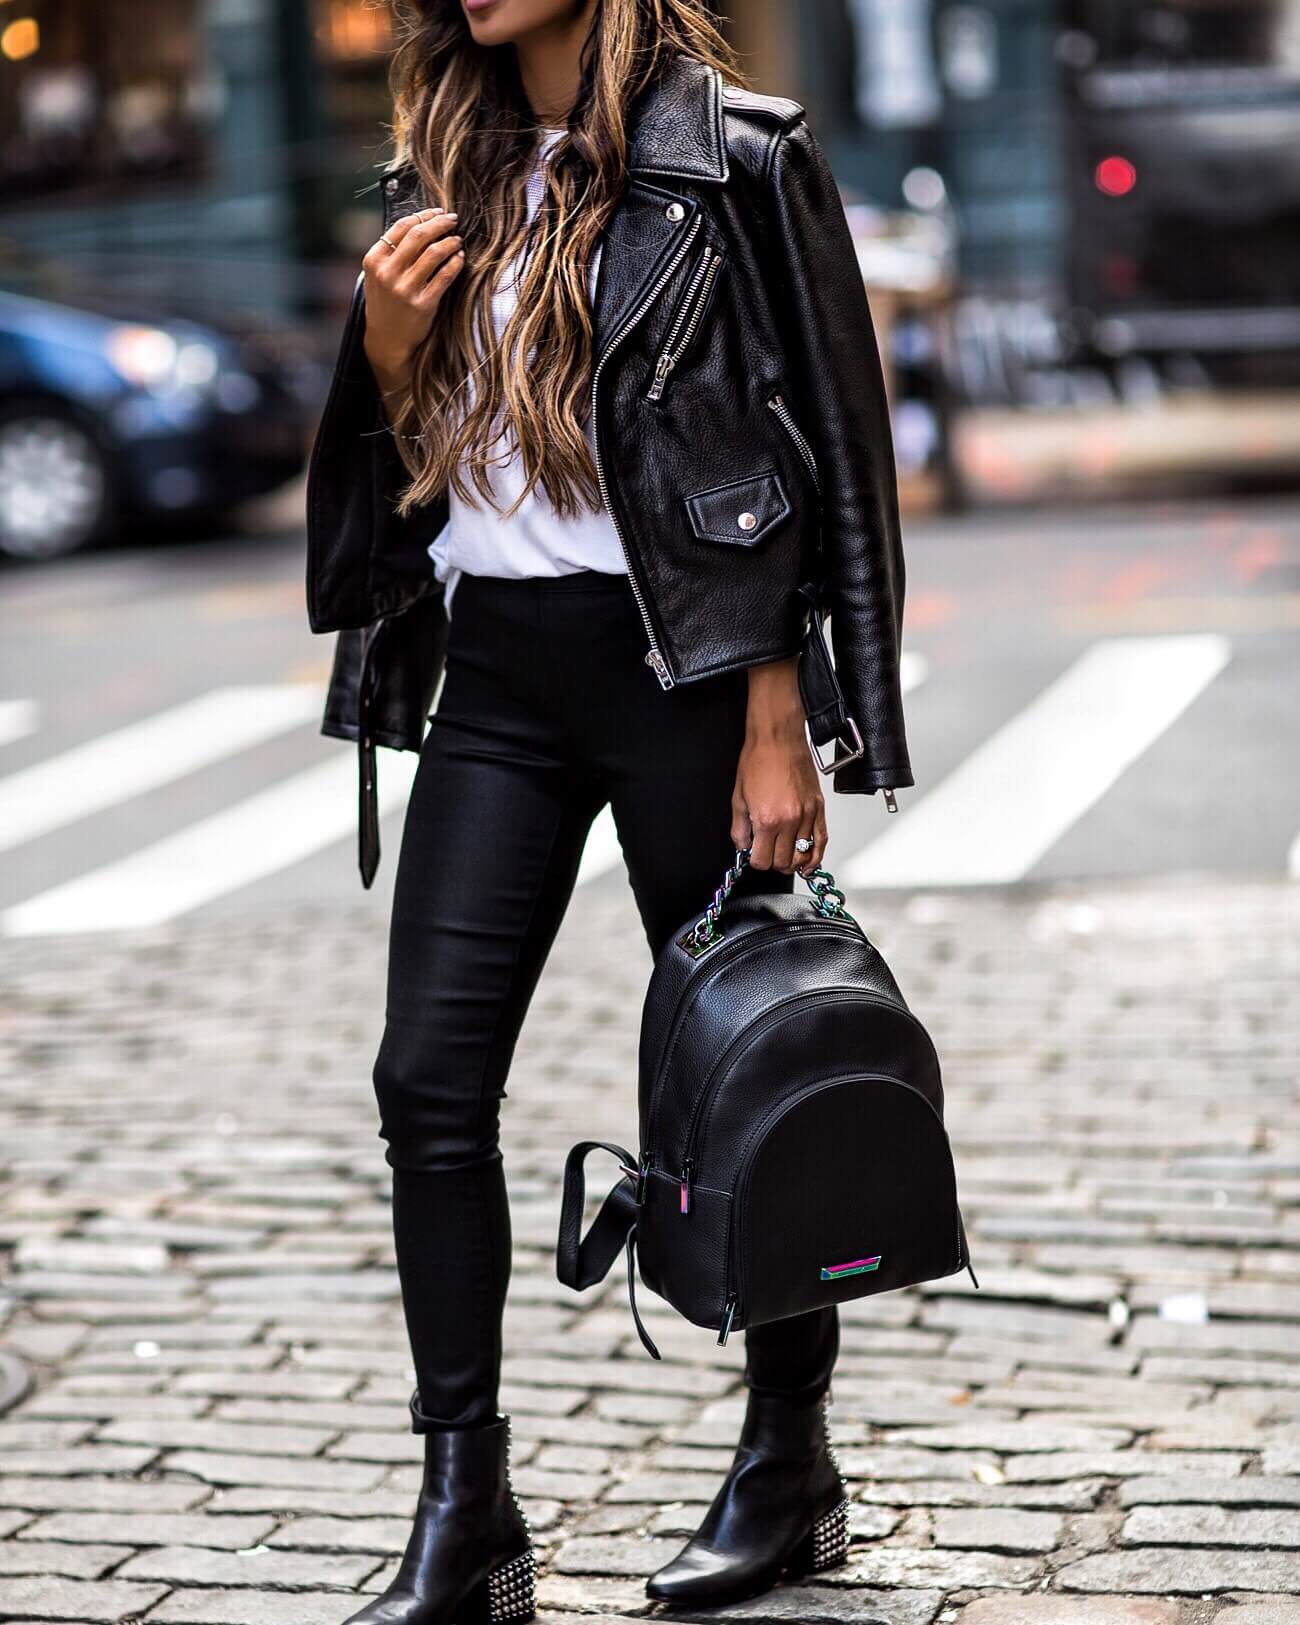 fashion blogger mia mia mine wearing leather studded booties by dolce vita